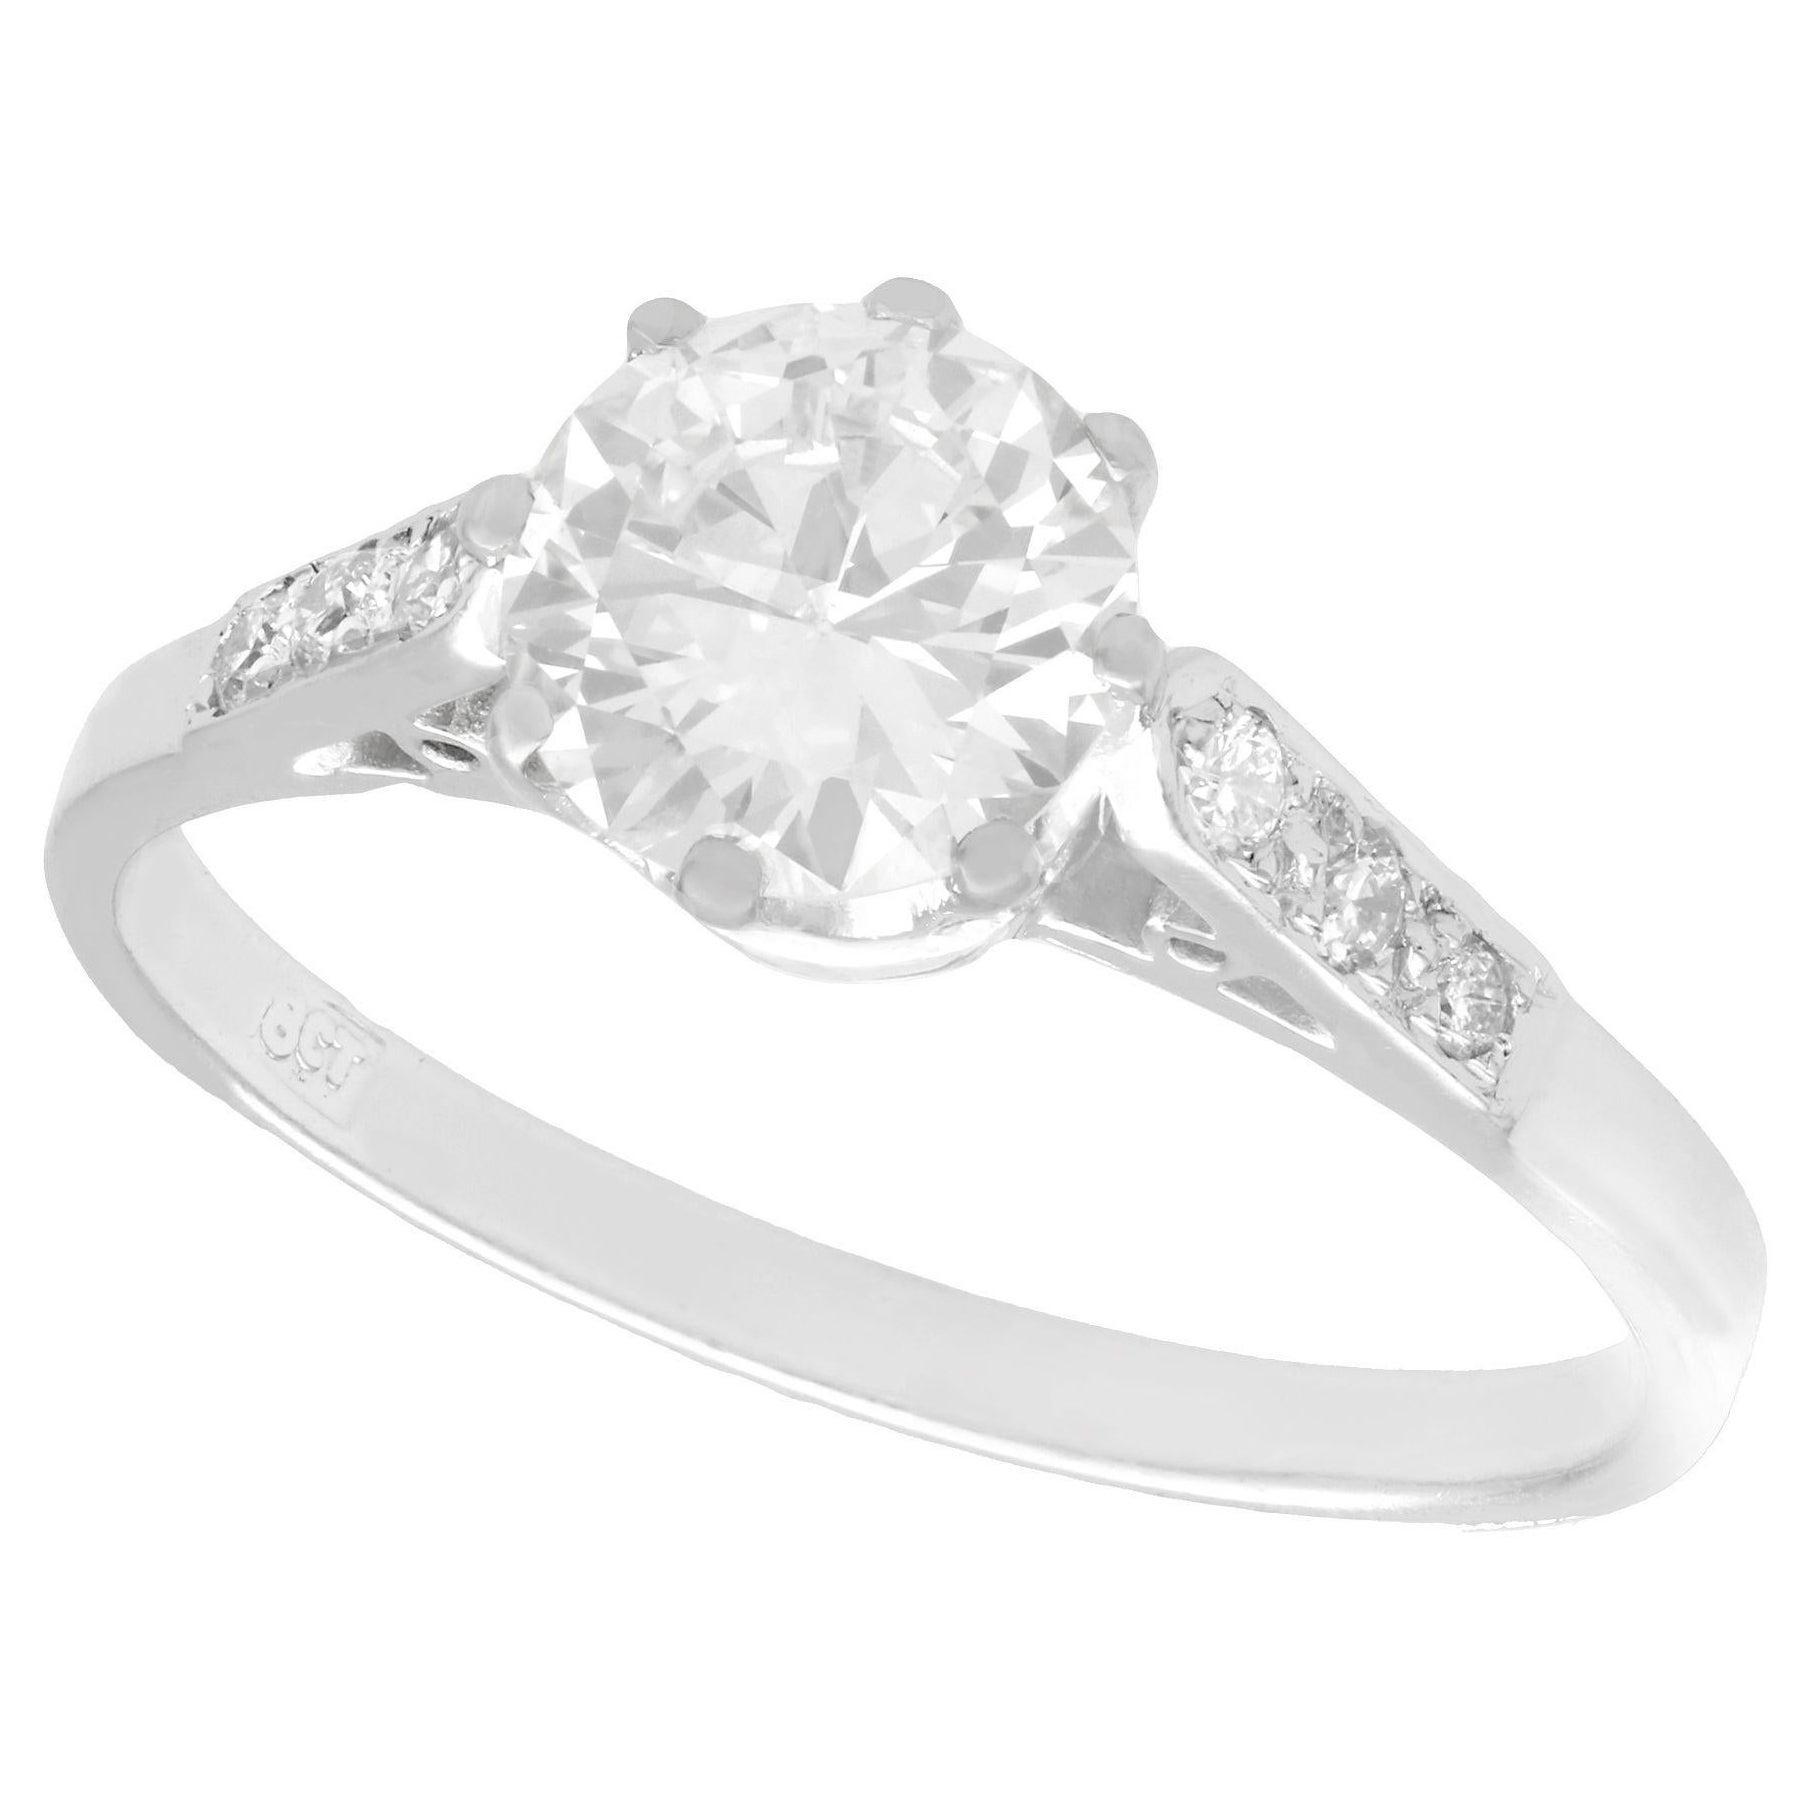 1920s Antique 1.12 Carat Diamond and White Gold Solitaire Engagement Ring For Sale